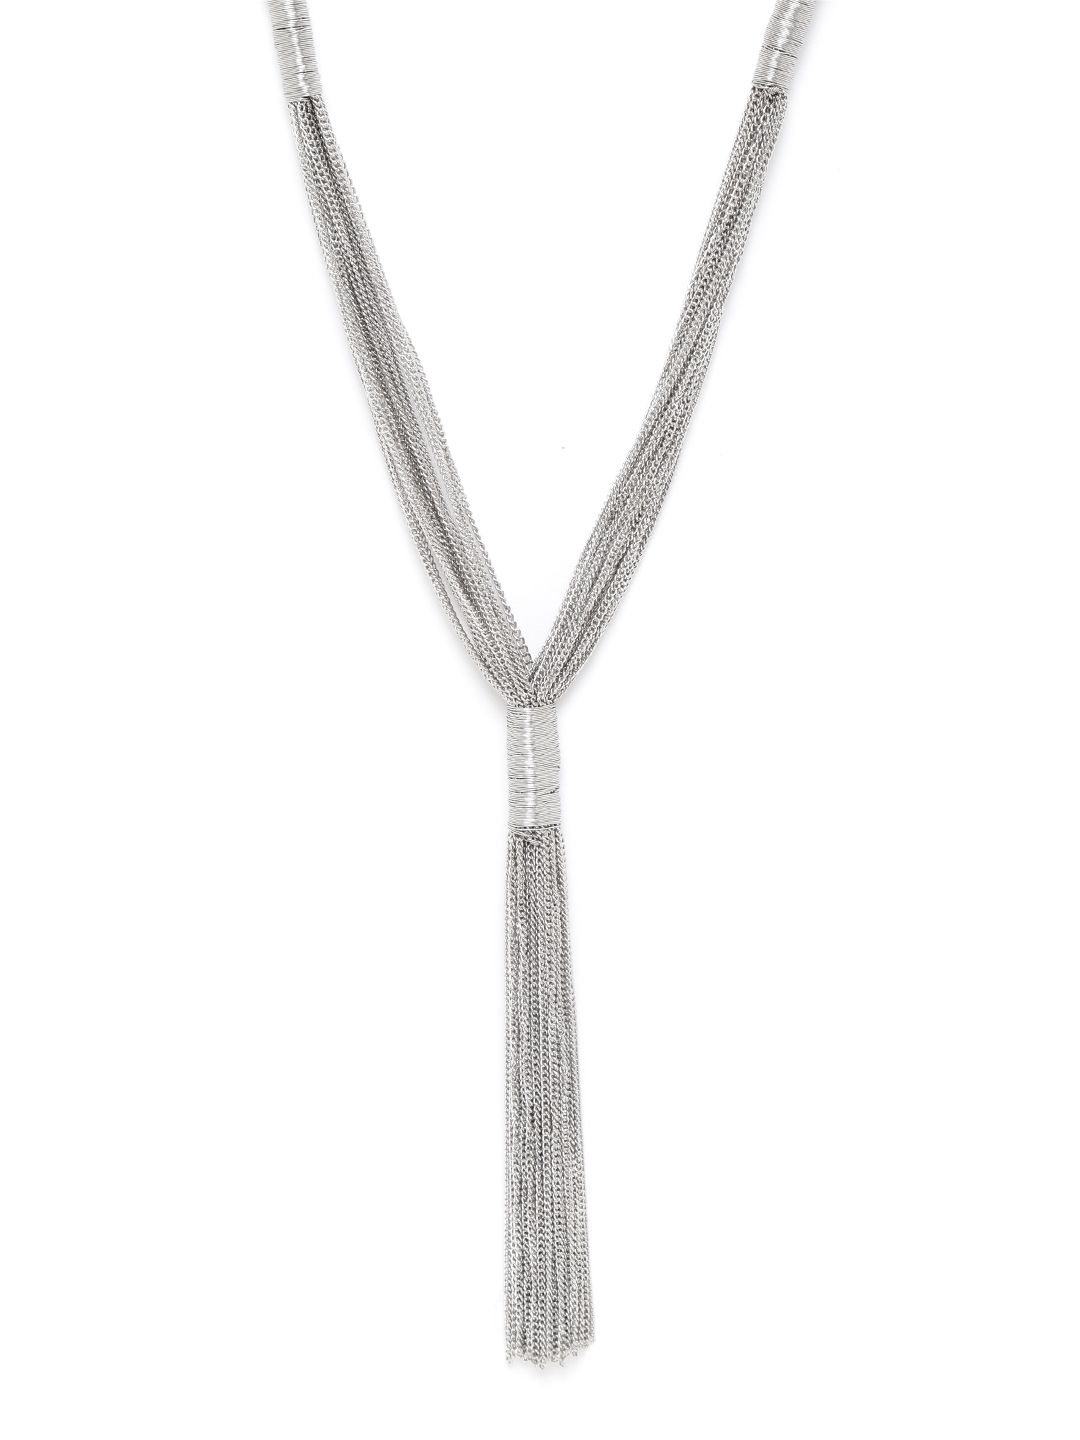 RICHEERA Silver-Plated Tasselled Multi-Stranded Necklace Price in India